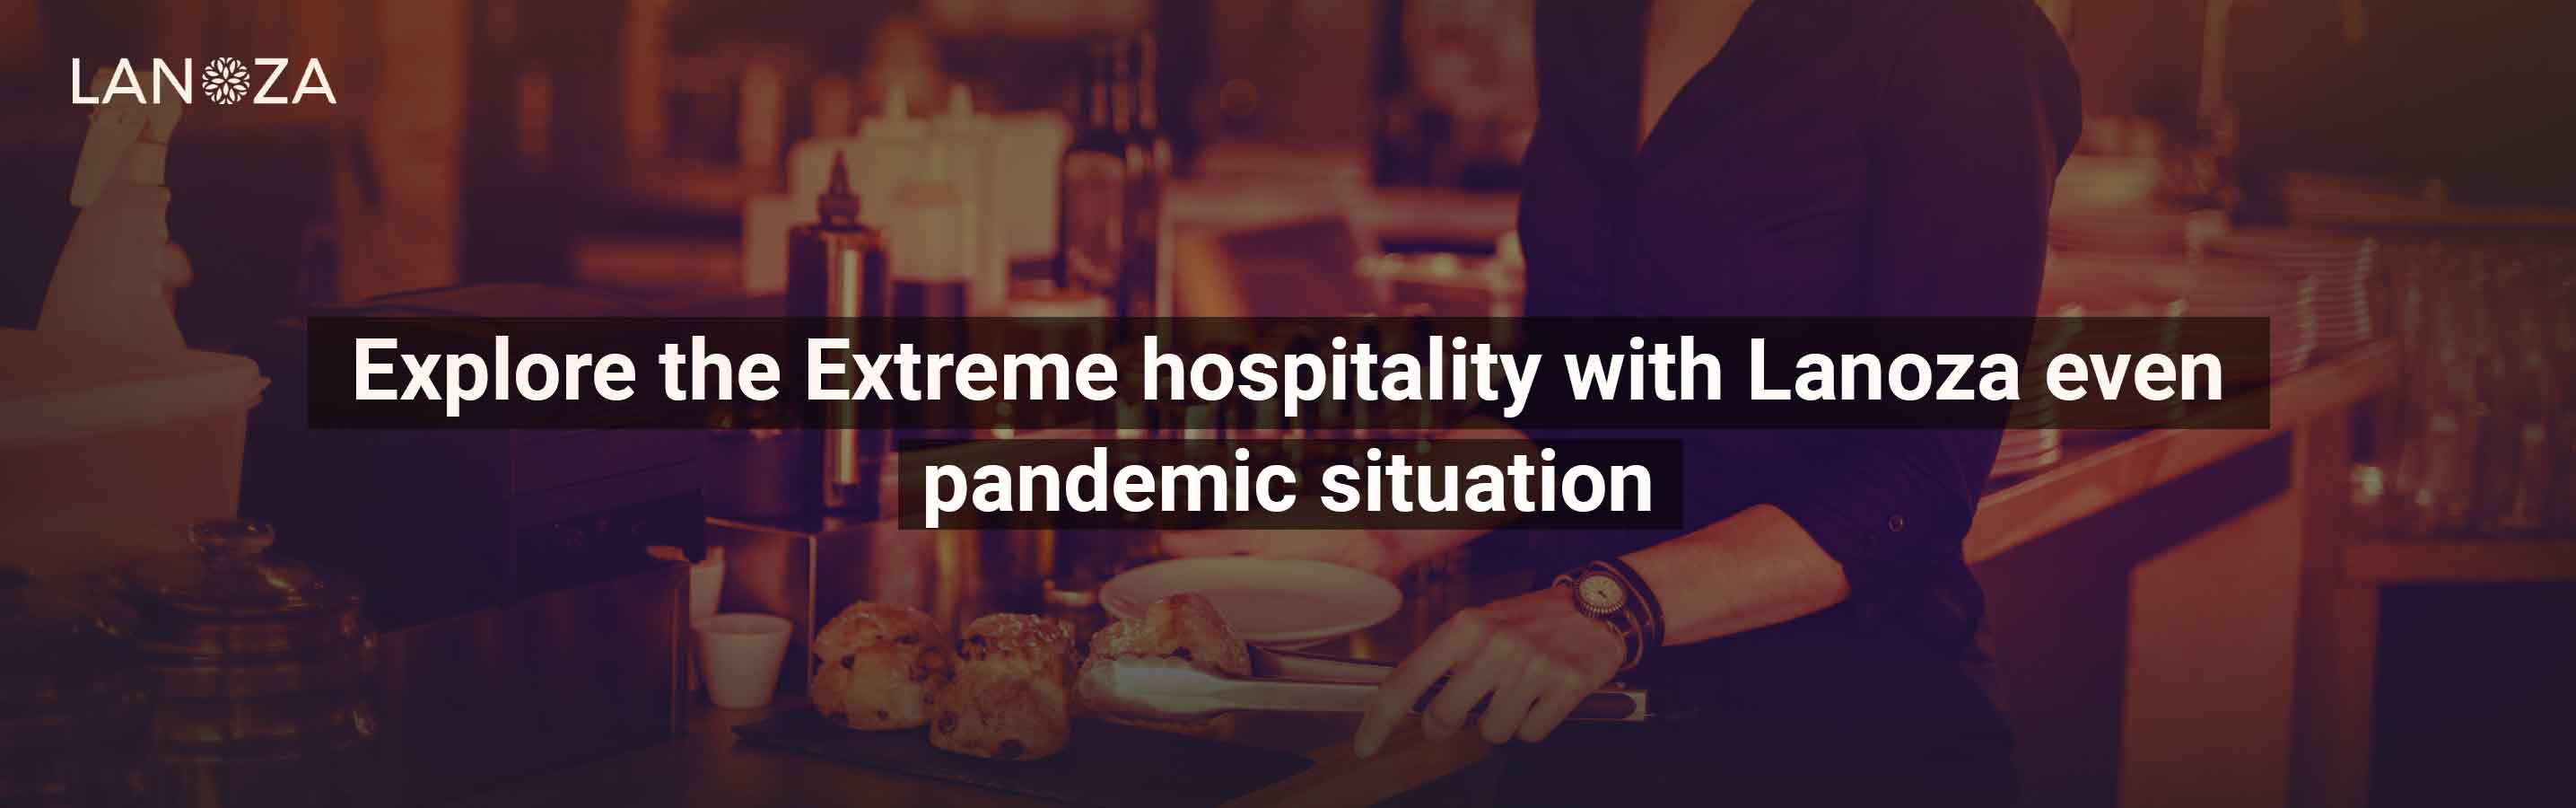 explore-the-extreme-hospitality-with-lanoza-even-pandemic-situation